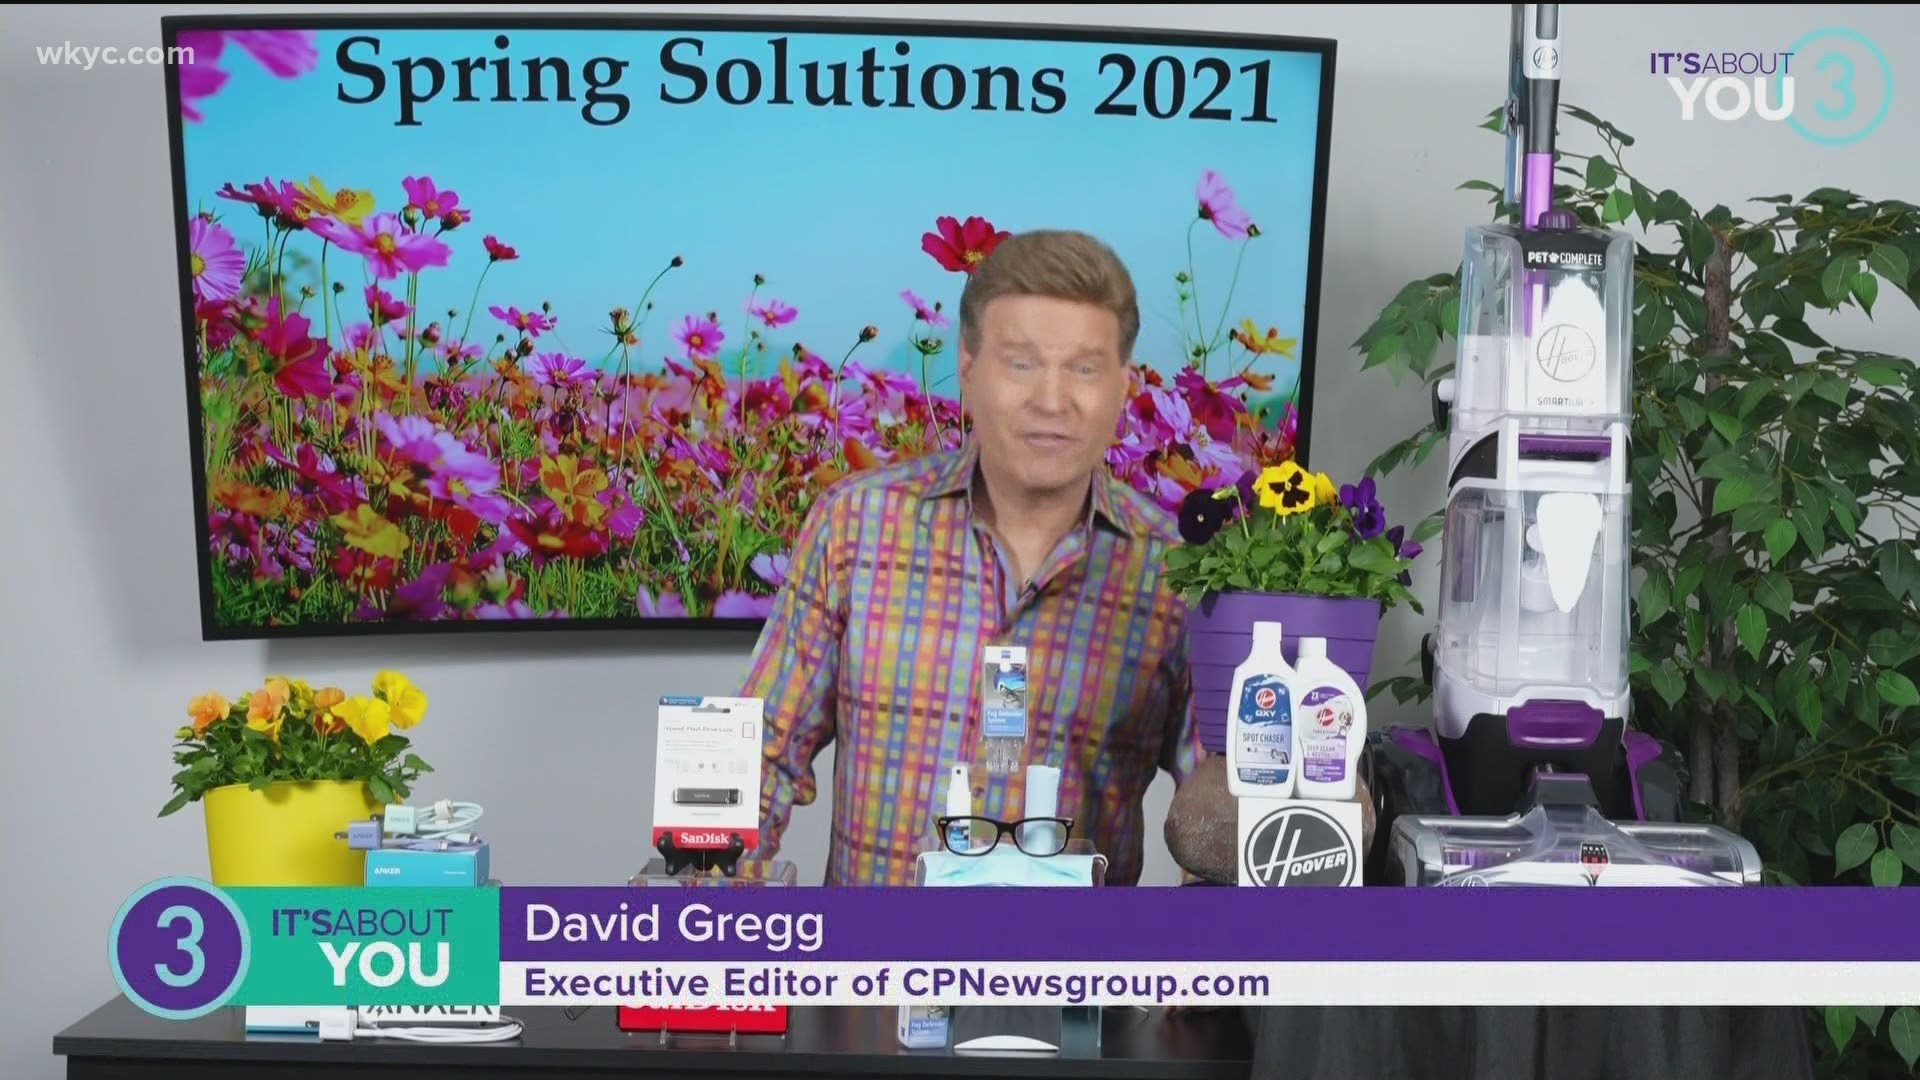 David Gregg is here with all the products to make you Spring successful!